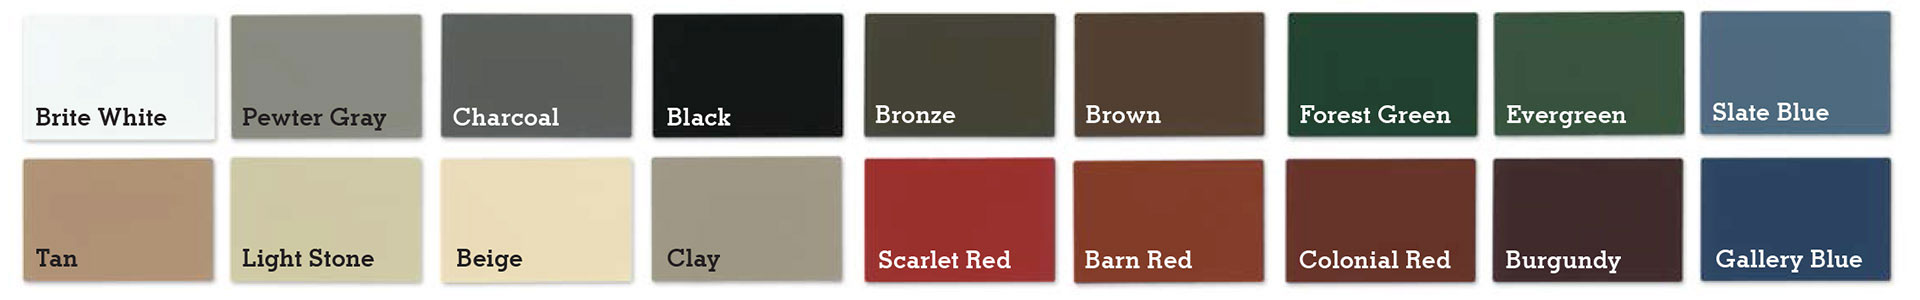 Metal Roofing & Siding Colors